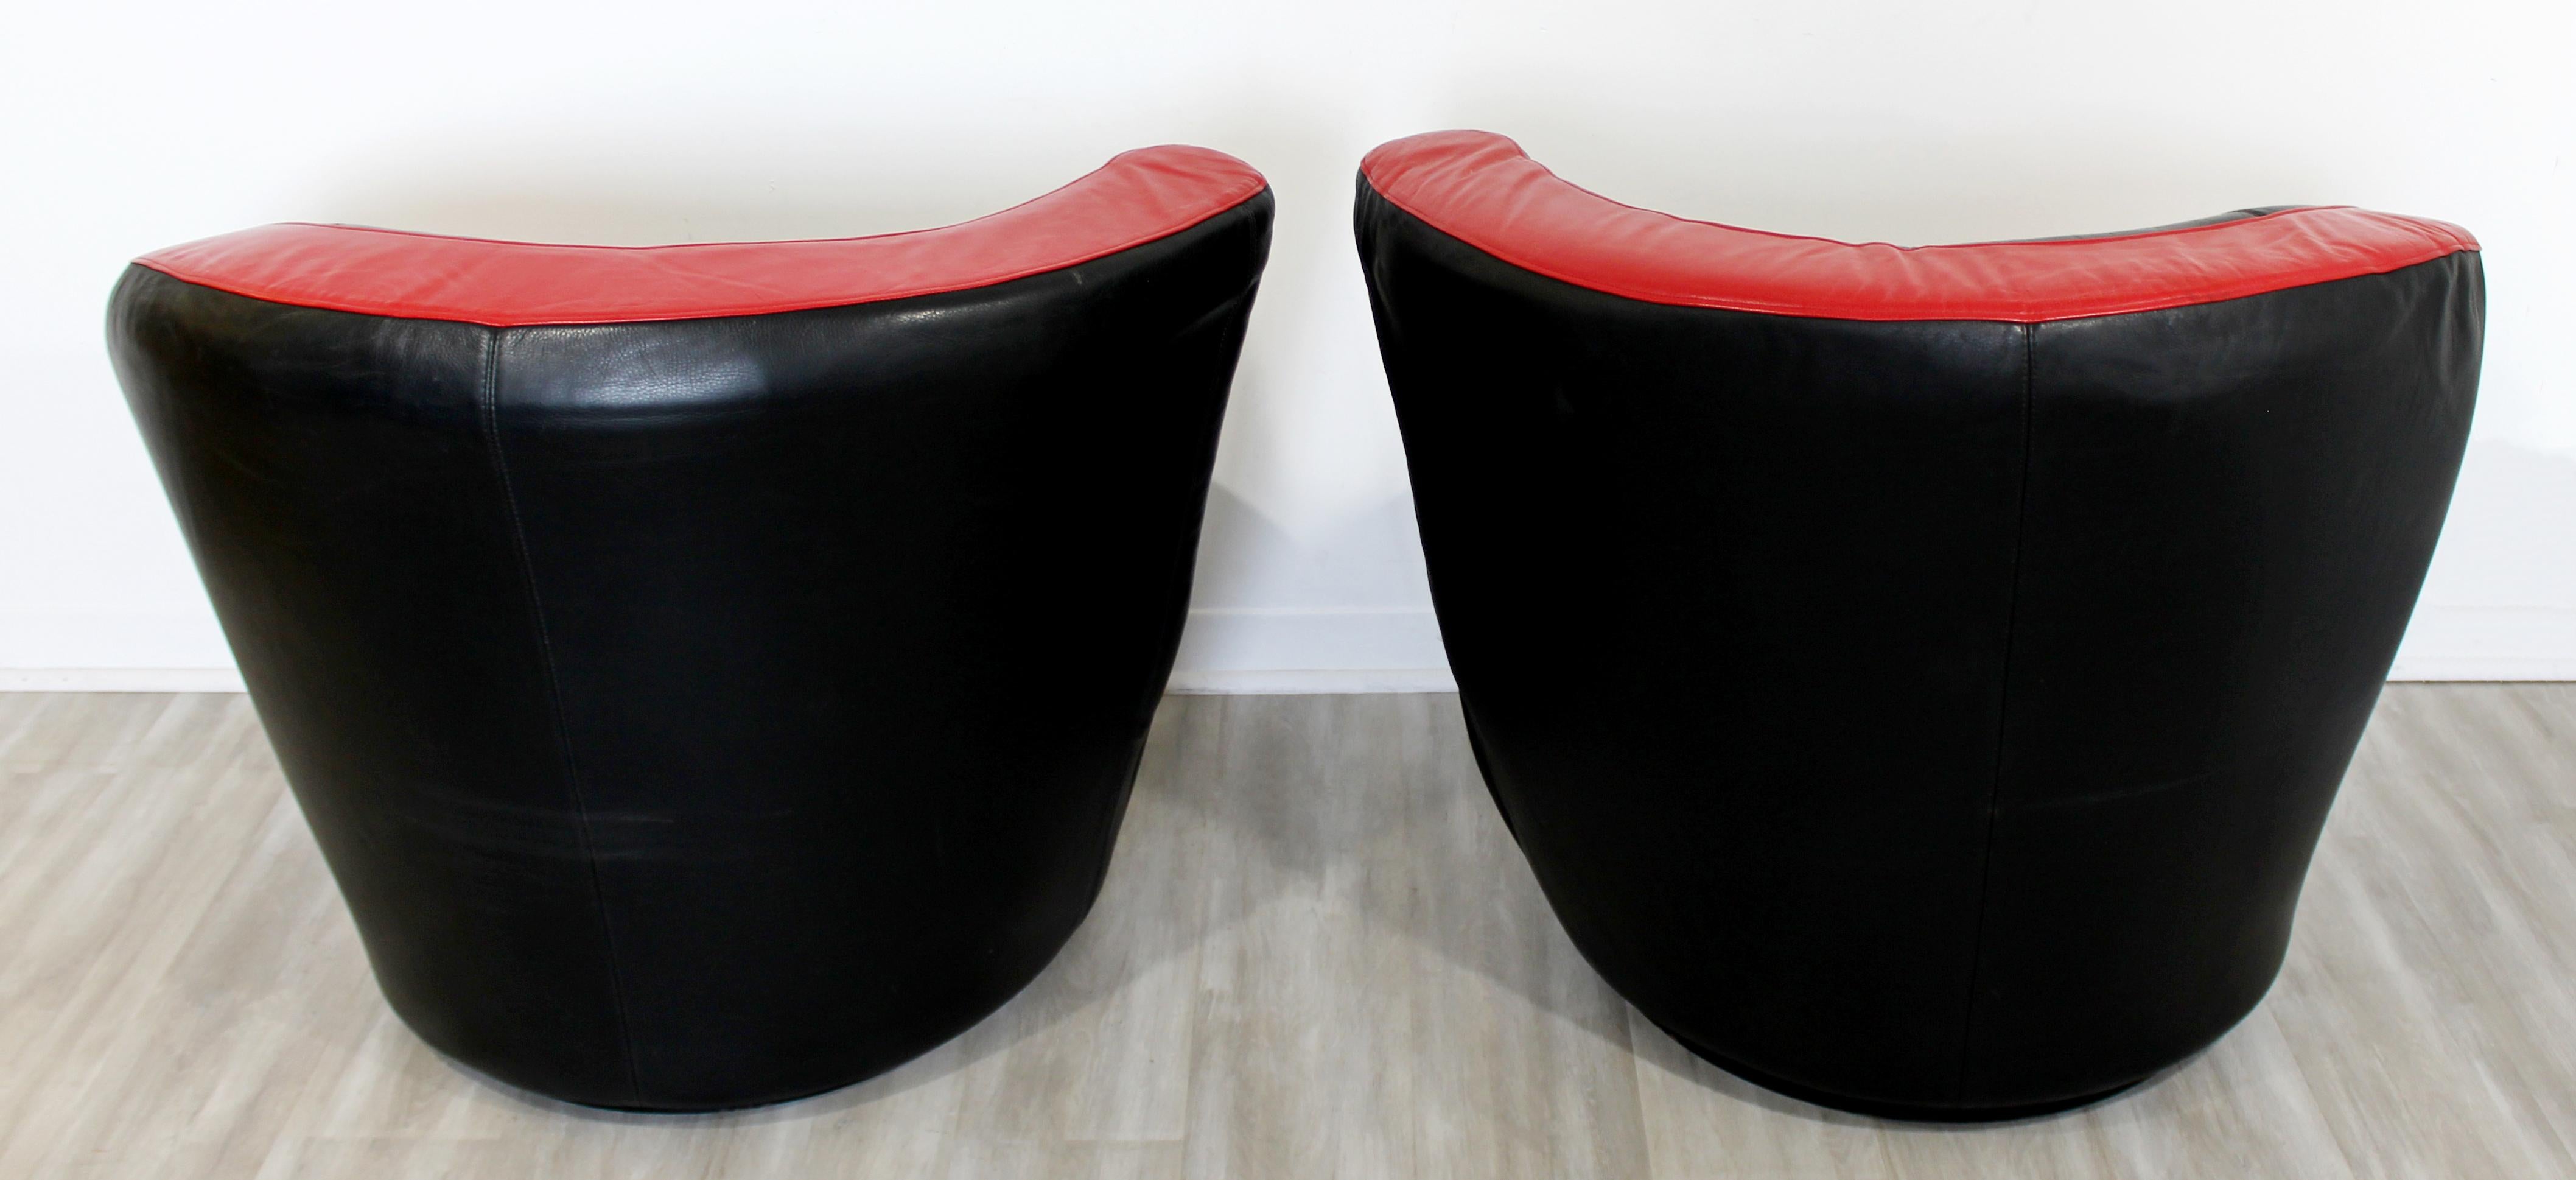 Contemporary Modern Pair Curved Swivel Lounge Chairs, 1980s In Good Condition For Sale In Keego Harbor, MI